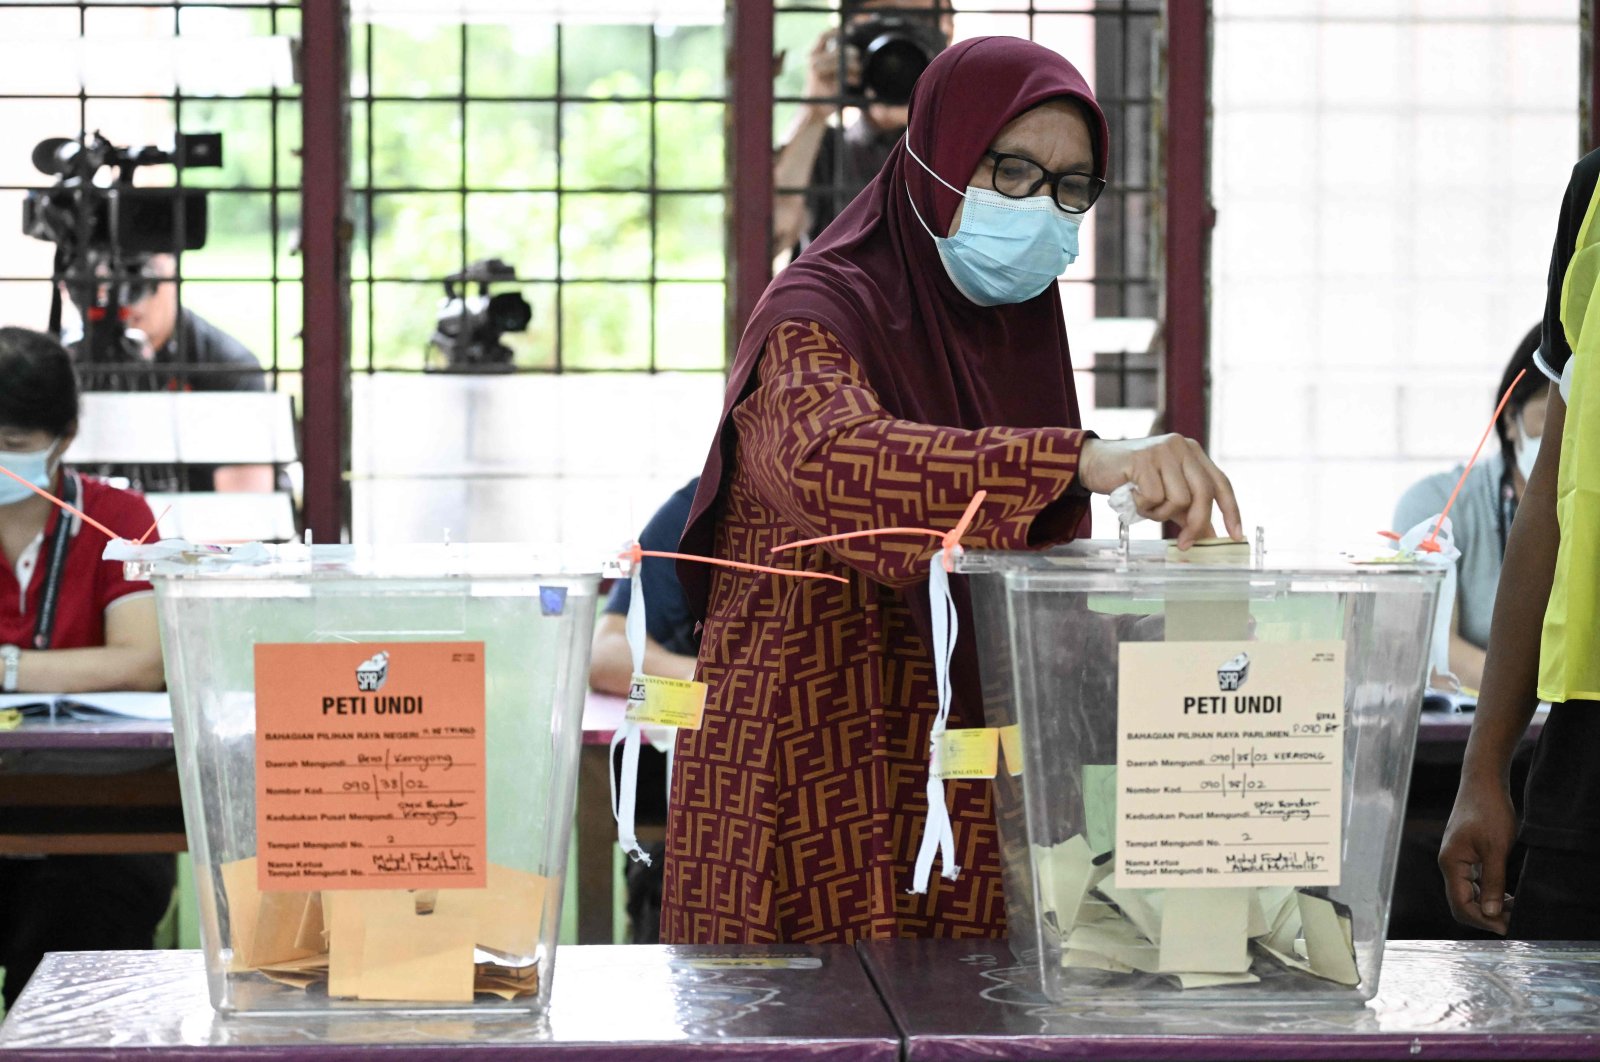 A woman casts her ballot at a polling station during the 15th general election, Bera, Malaysia, Nov. 19, 2022. (AFP Photo)